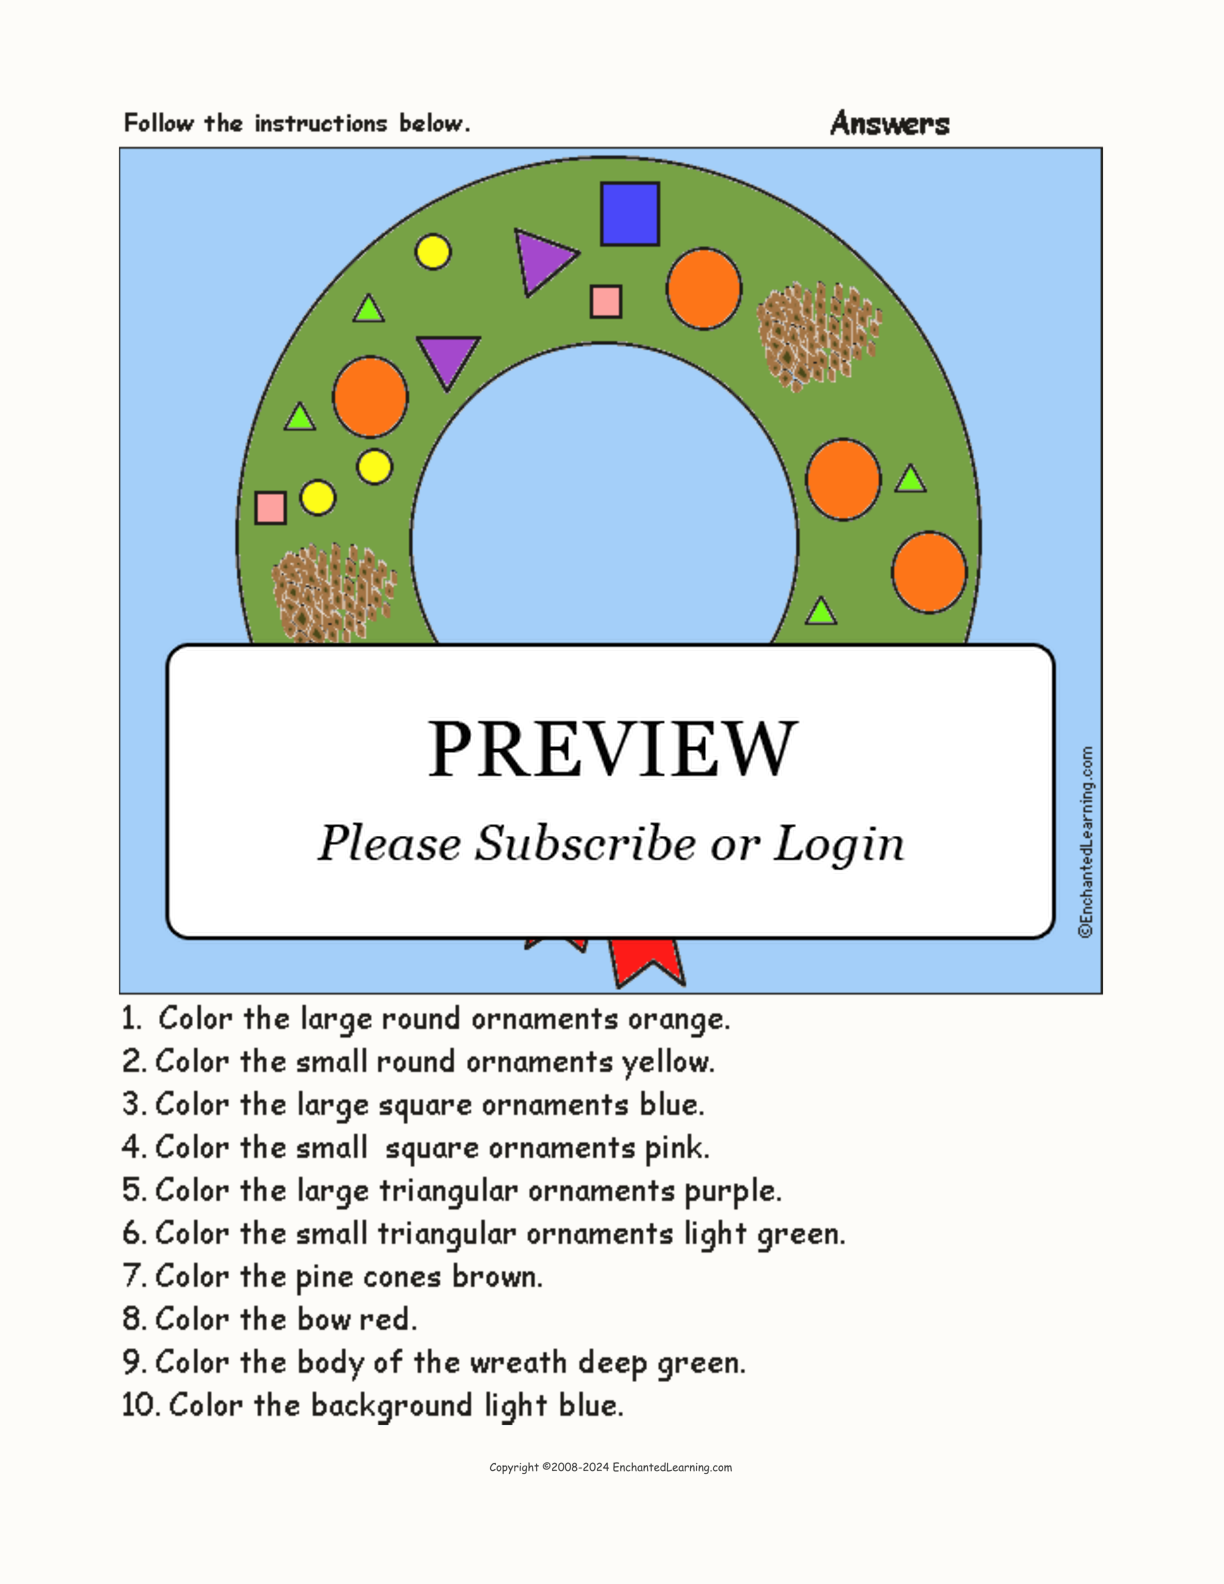 Wreath - Follow the Instructions interactive worksheet page 2